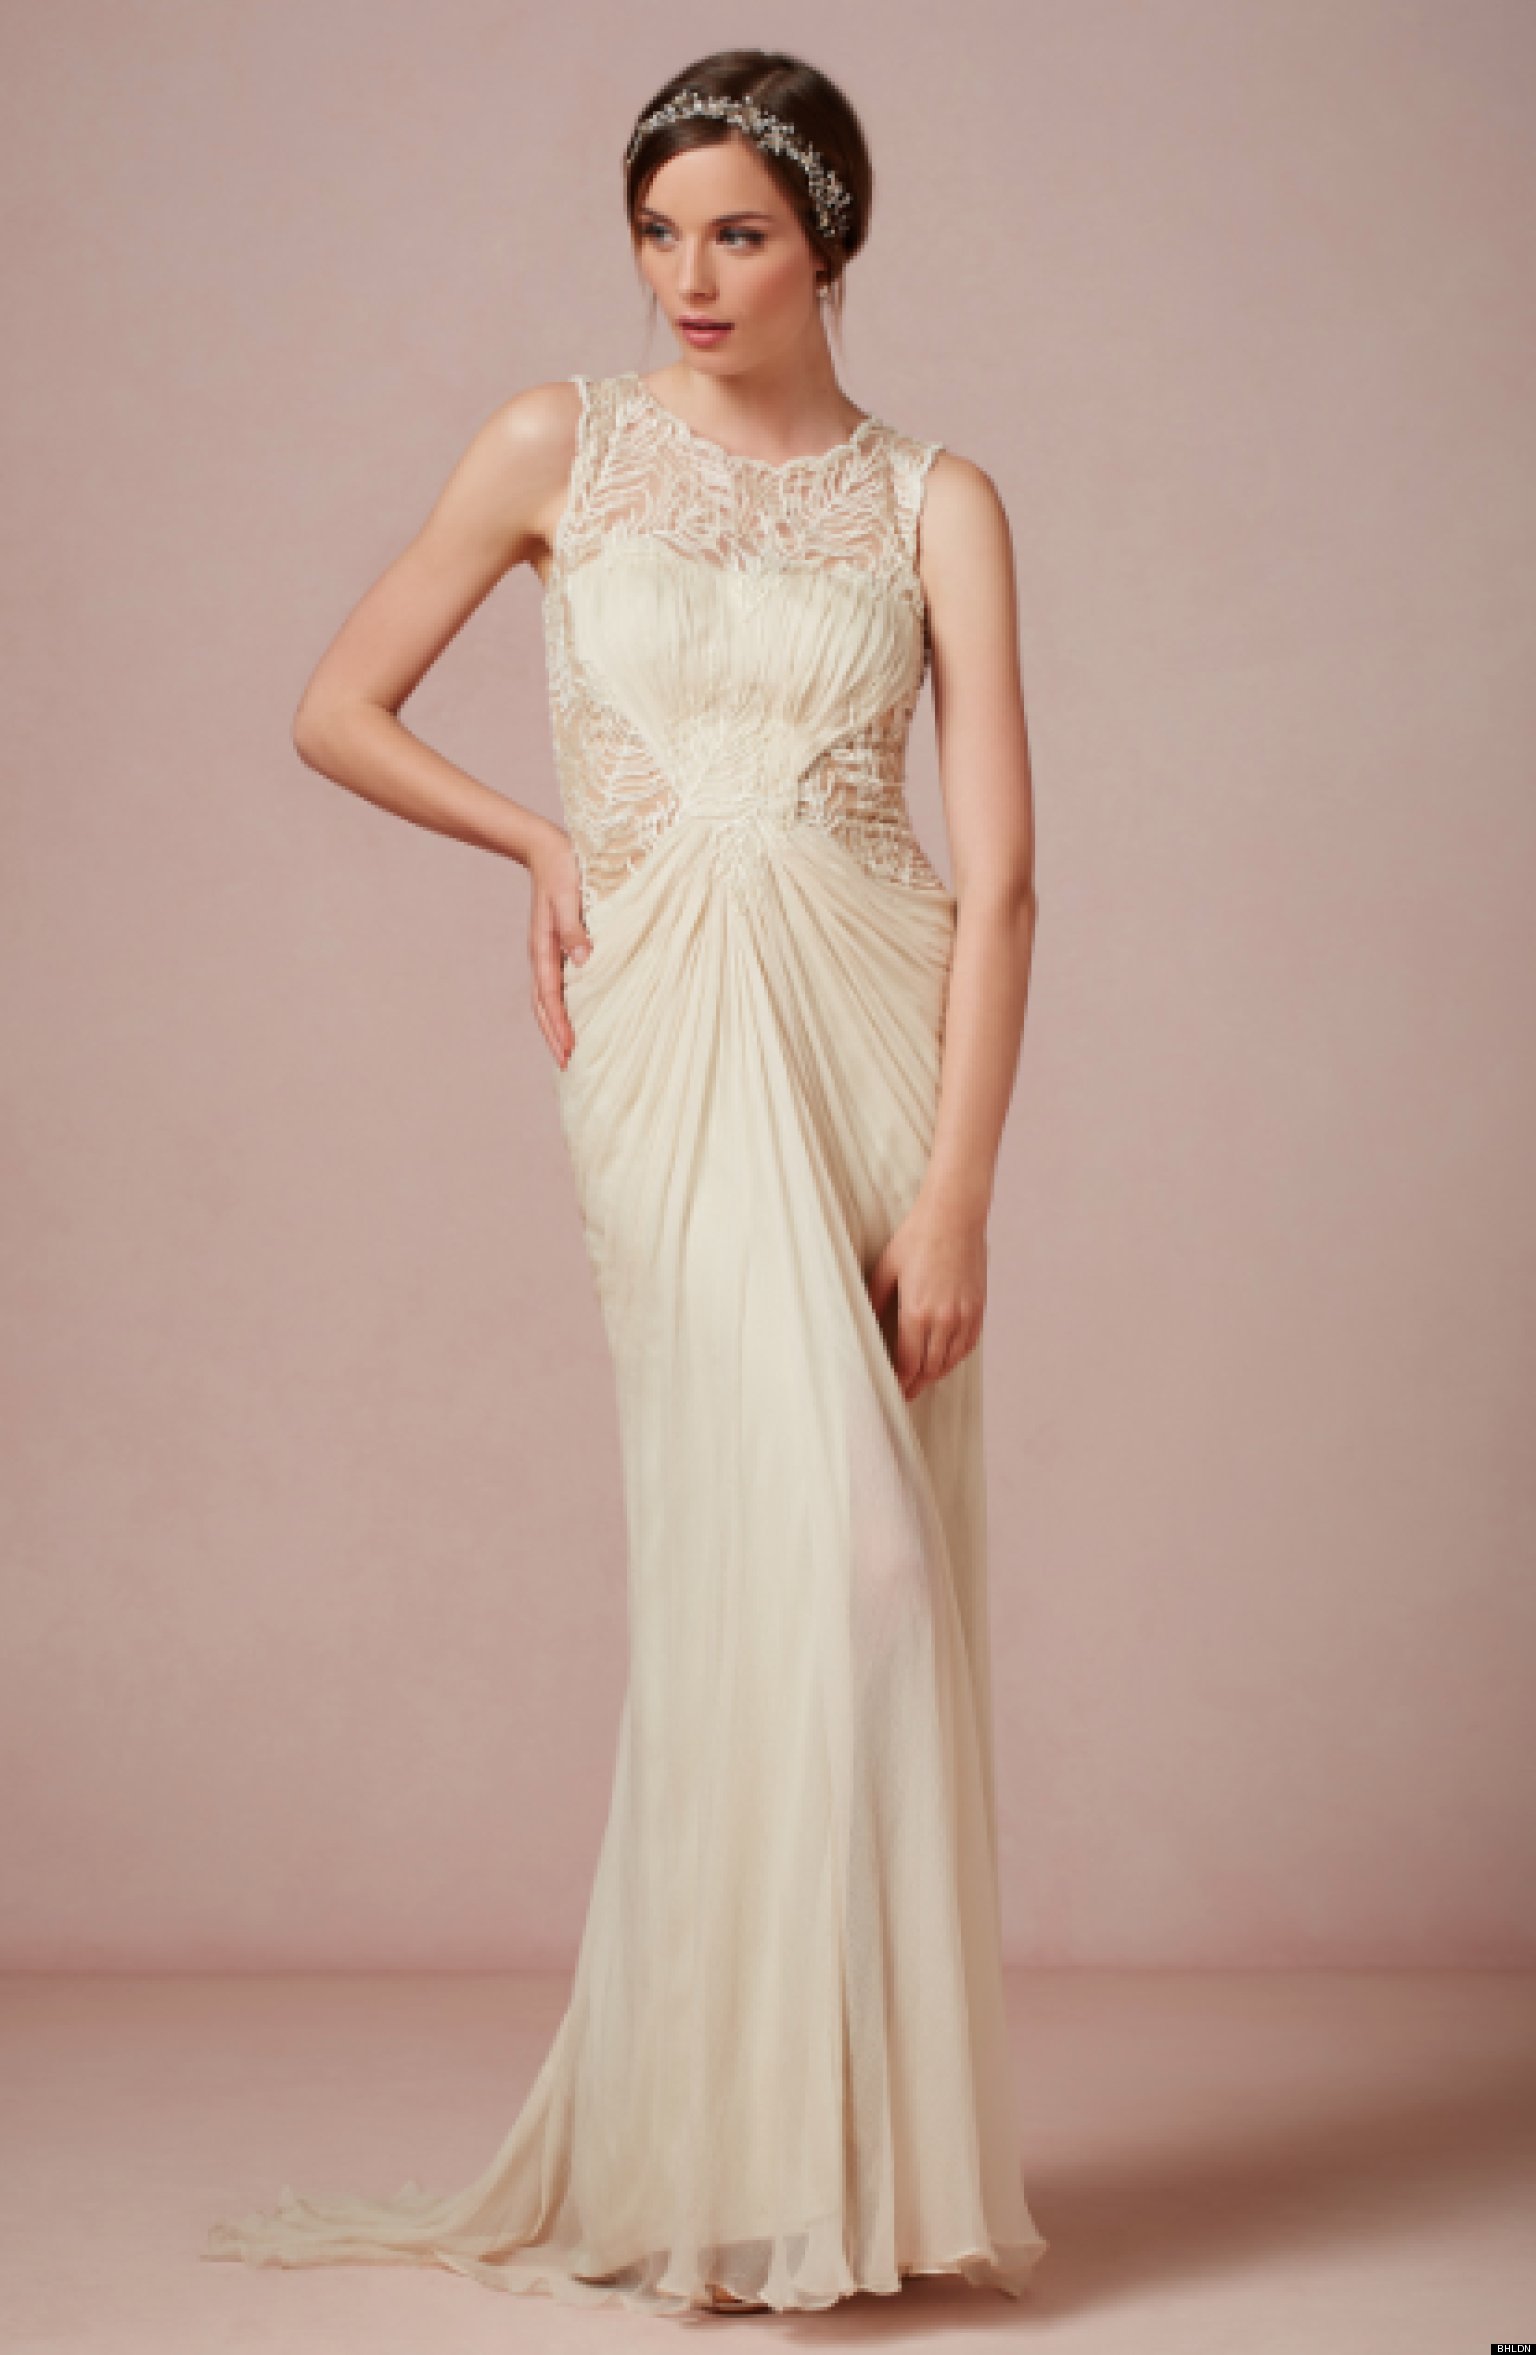 Download this Bhldn Wedding Dresses... picture